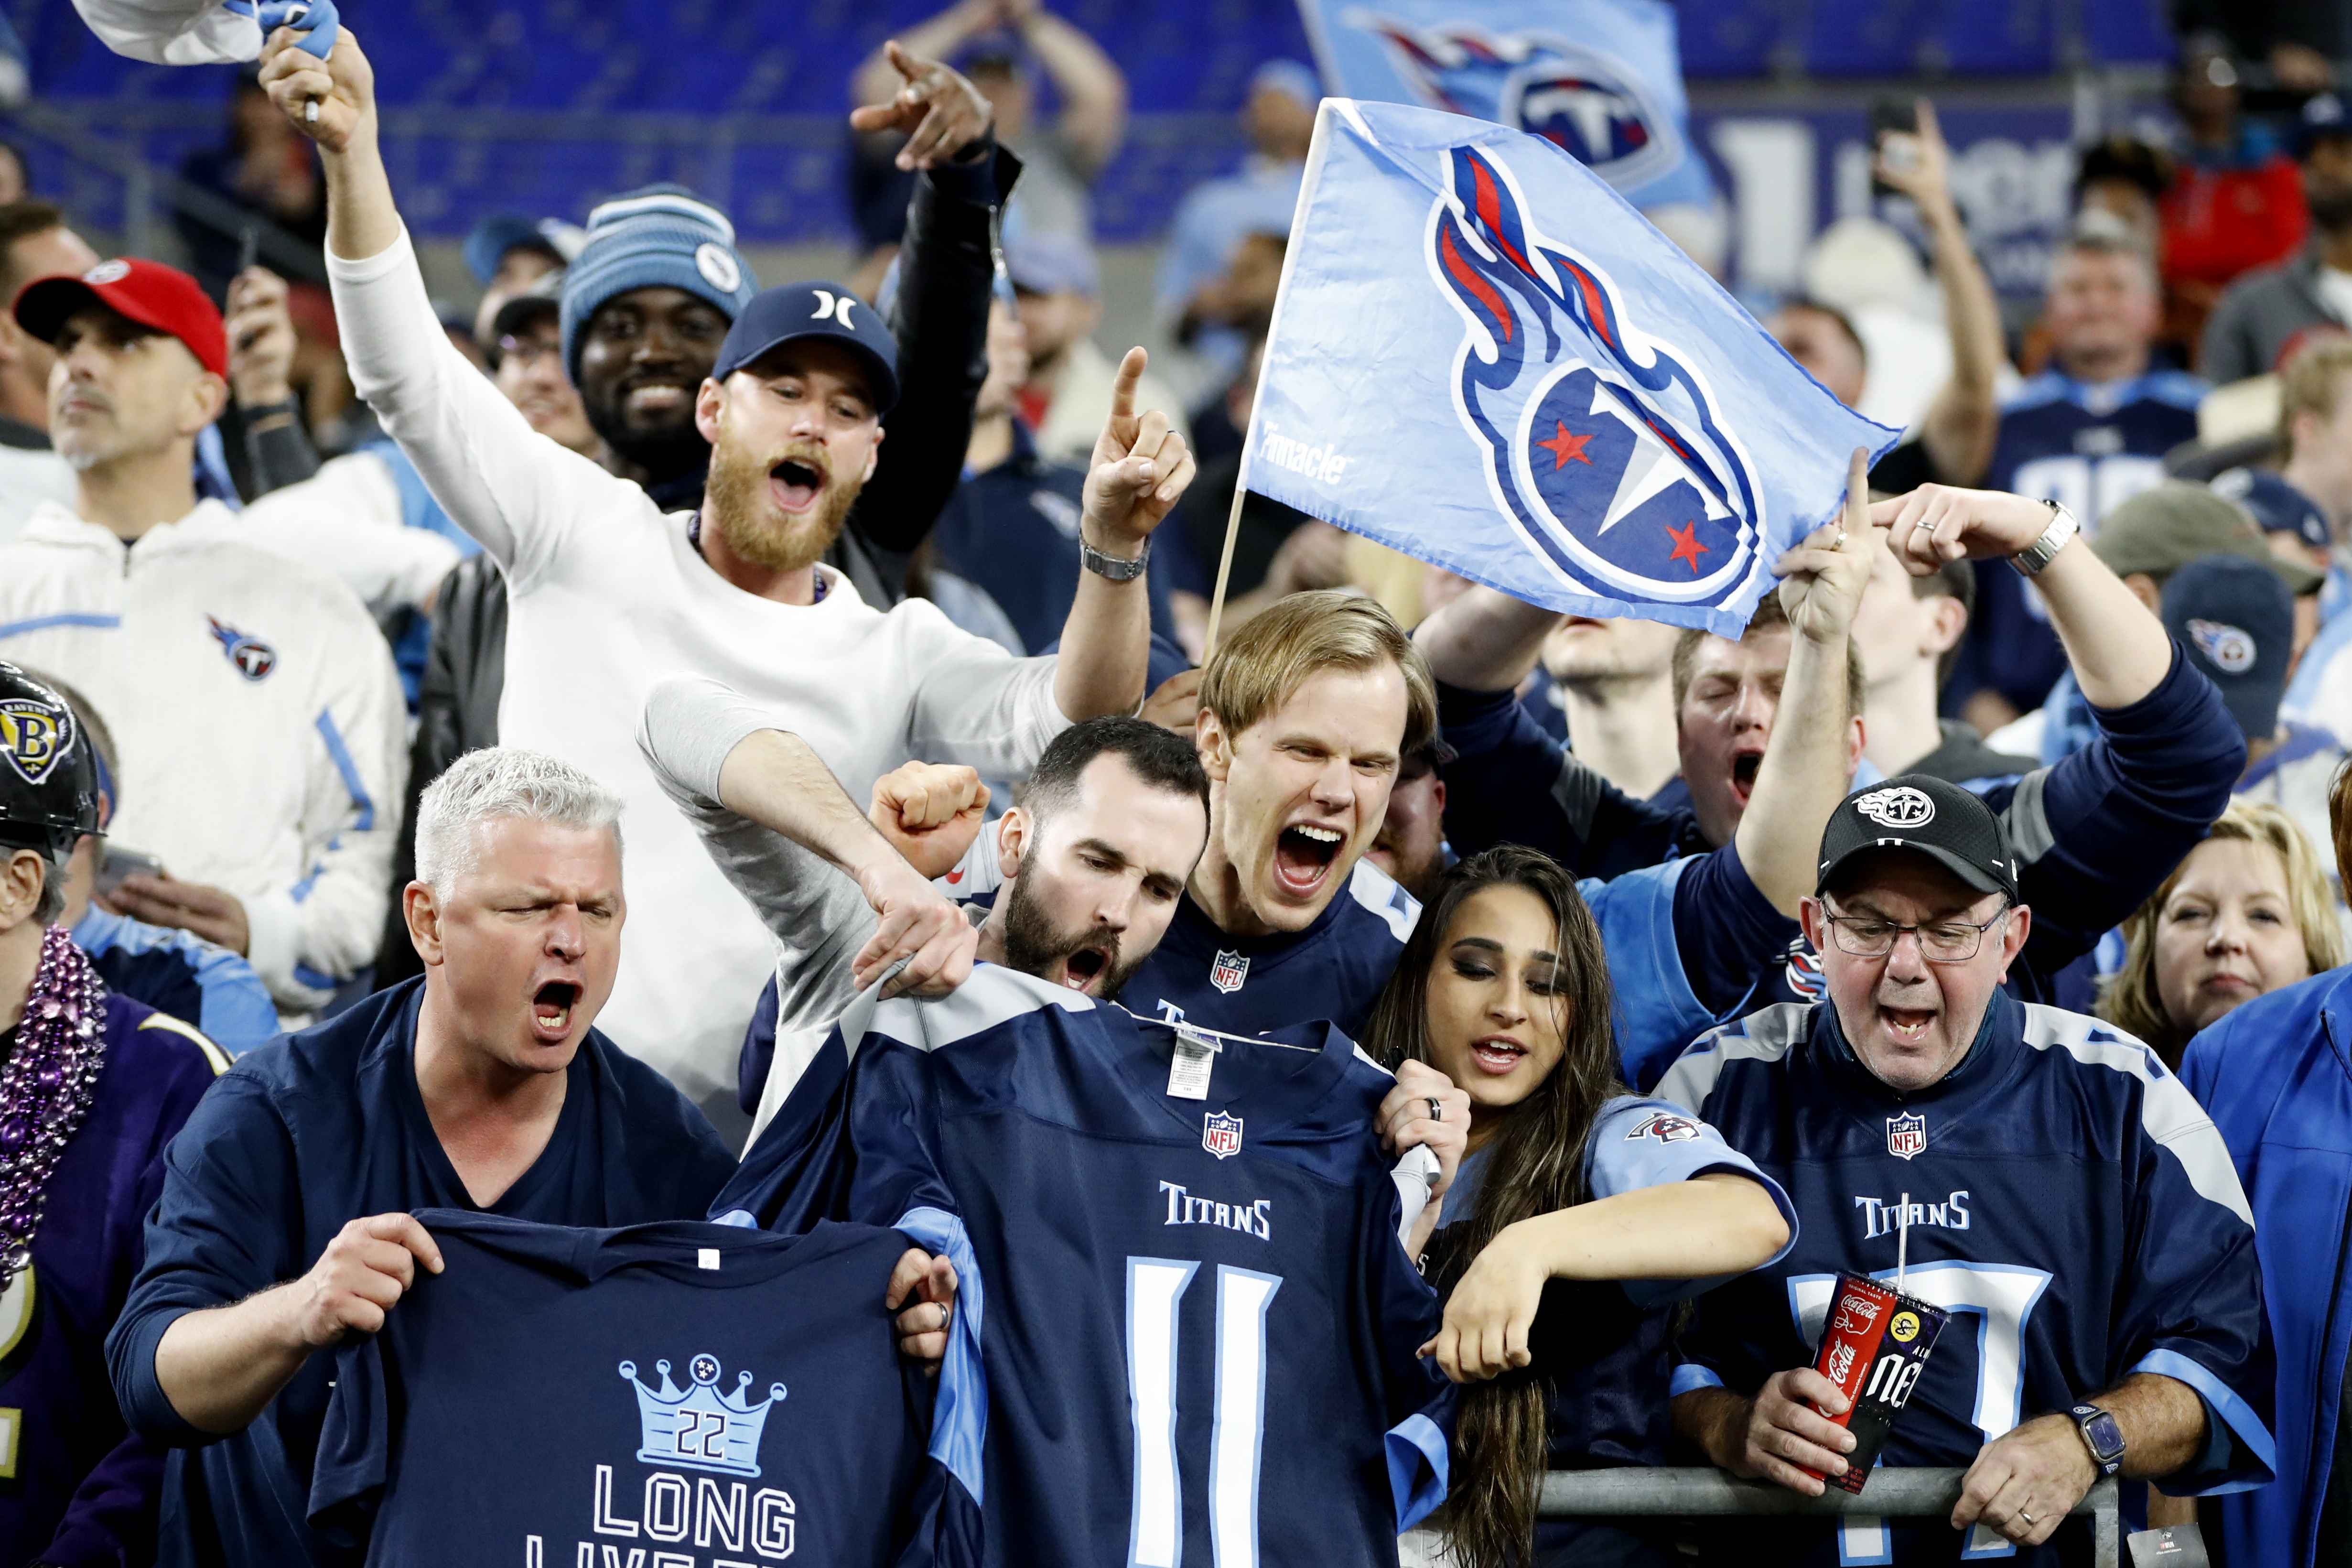 Can the Tennessee Titans find support in Memphis, or are hard feelings still an issue?